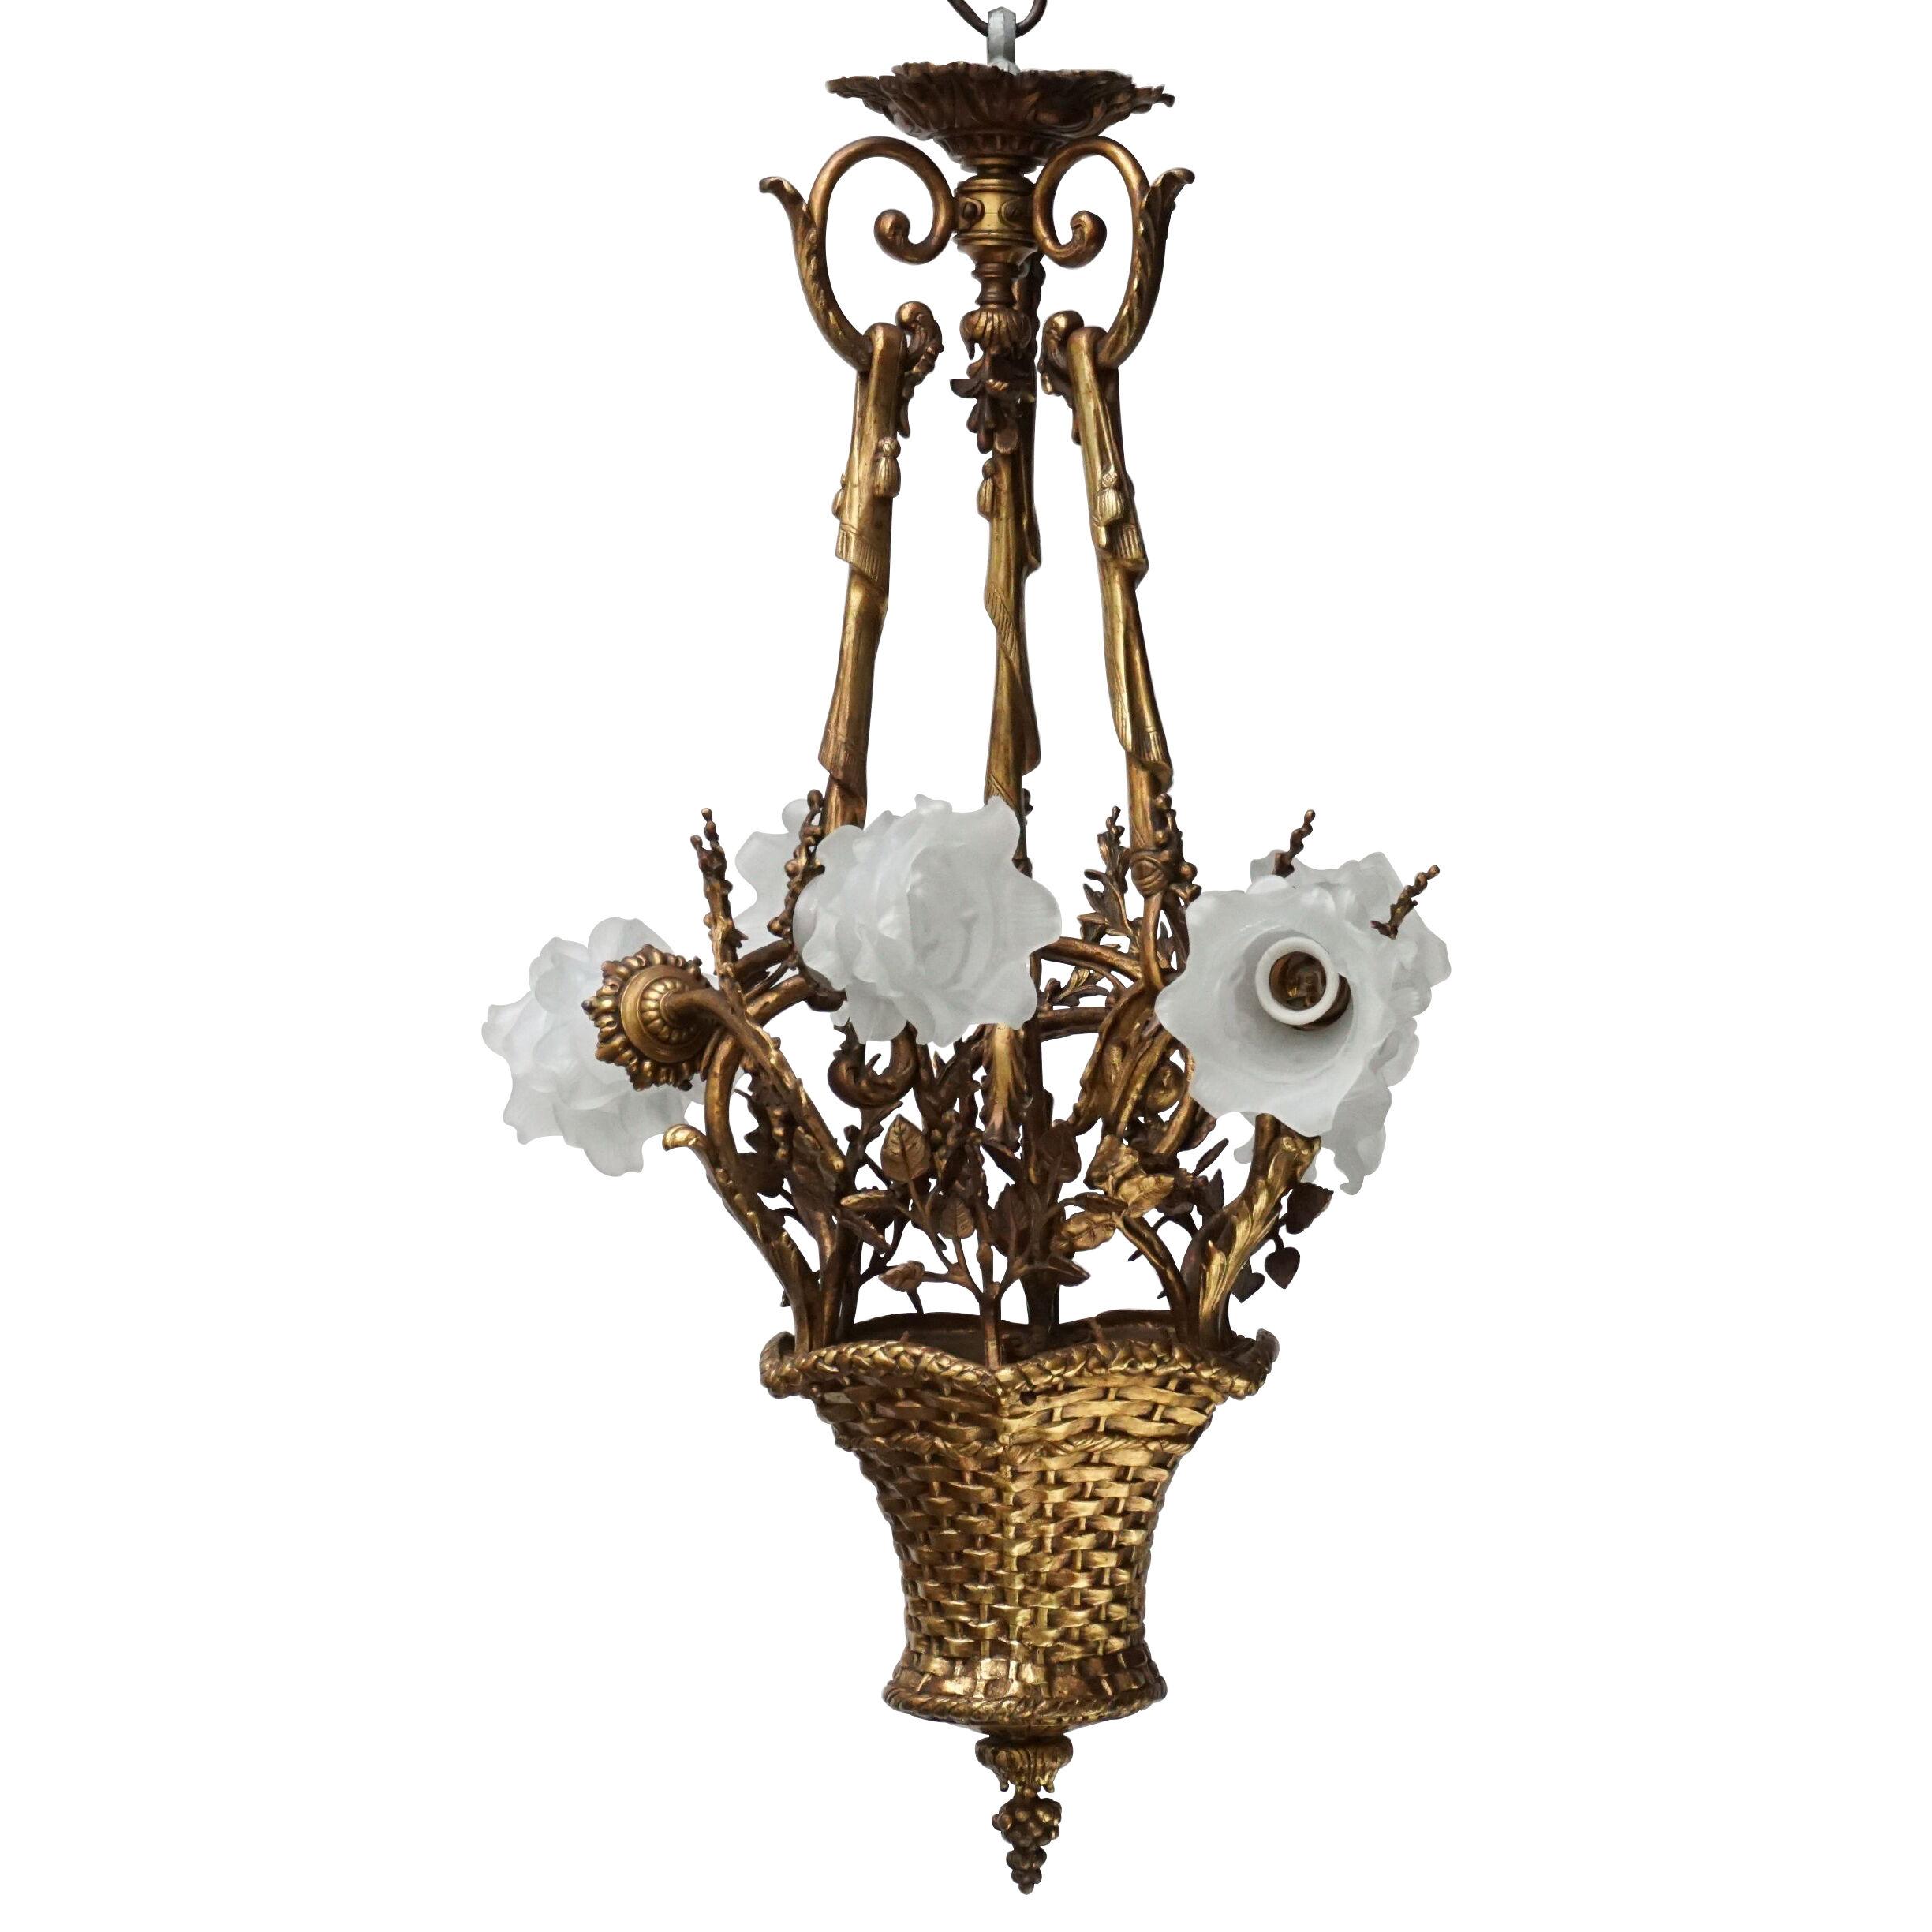 19th C. French Gilt Bronze Basket with Glass Roses, Marie Antoinette Chandelier